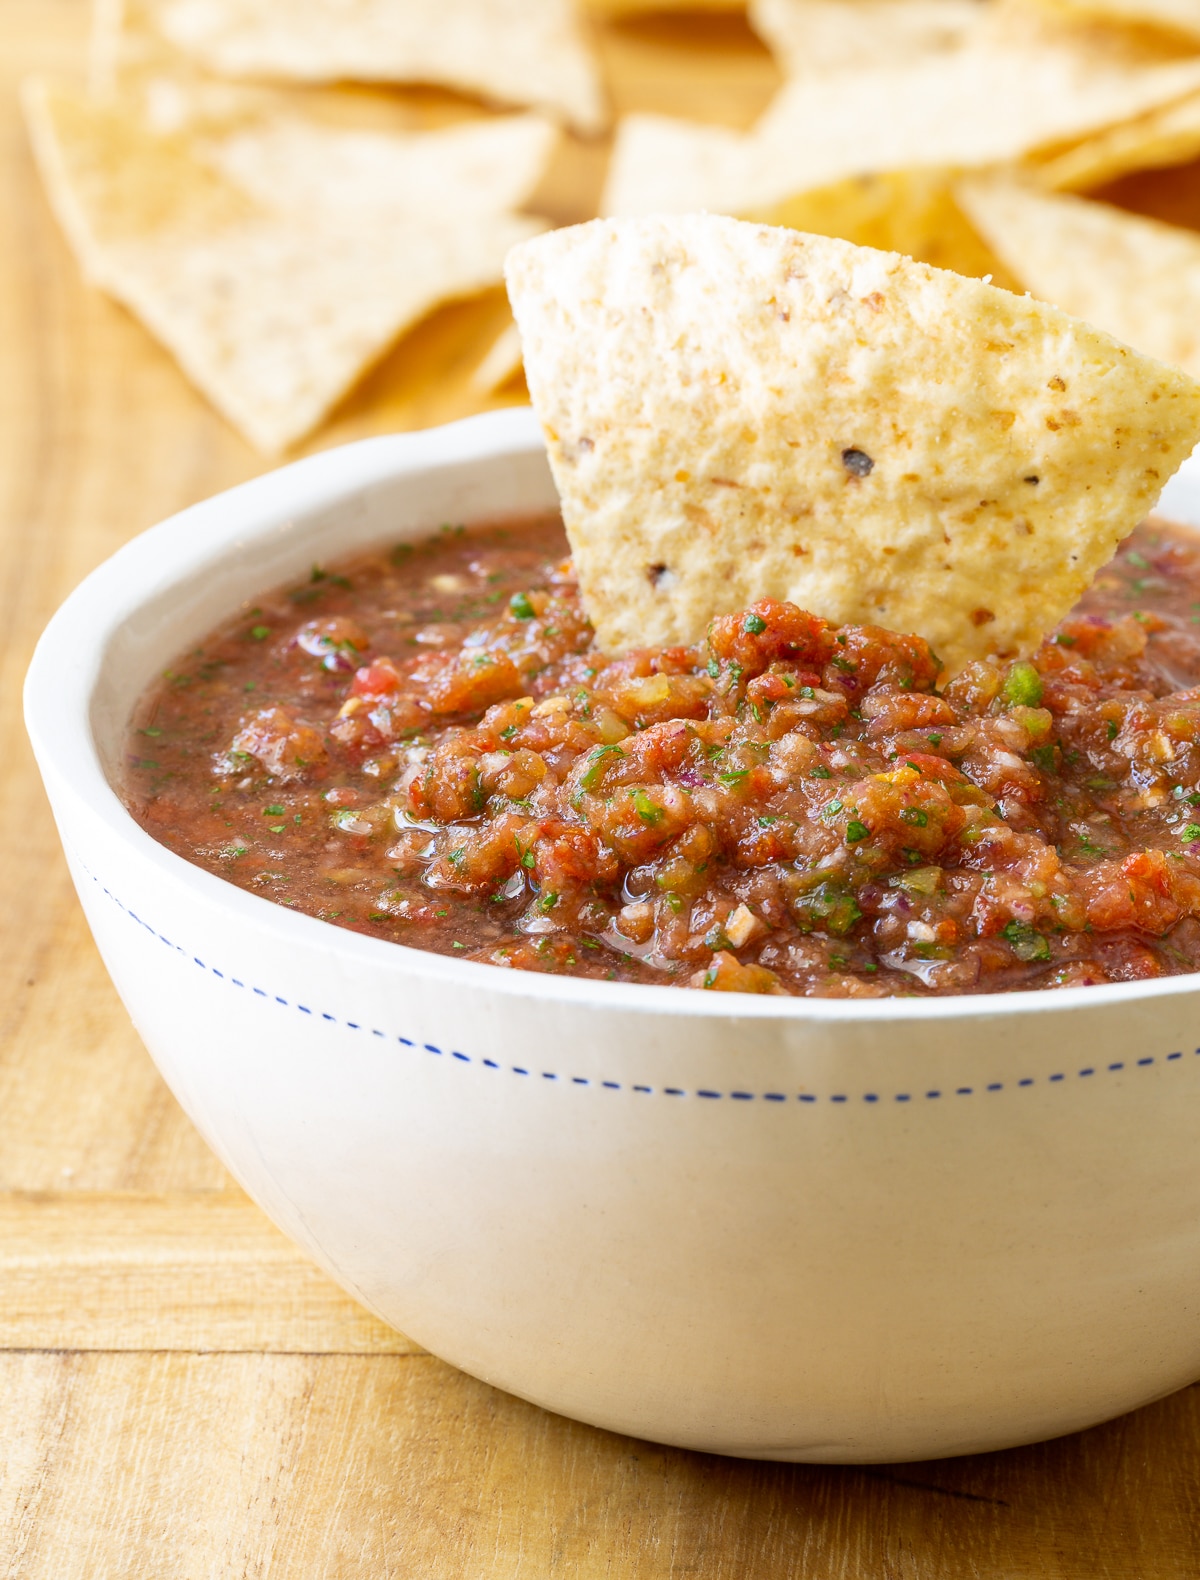 Annies Salsa Recipe  : Spice Up Your Meal with This Mouthwatering Homemade Creation!